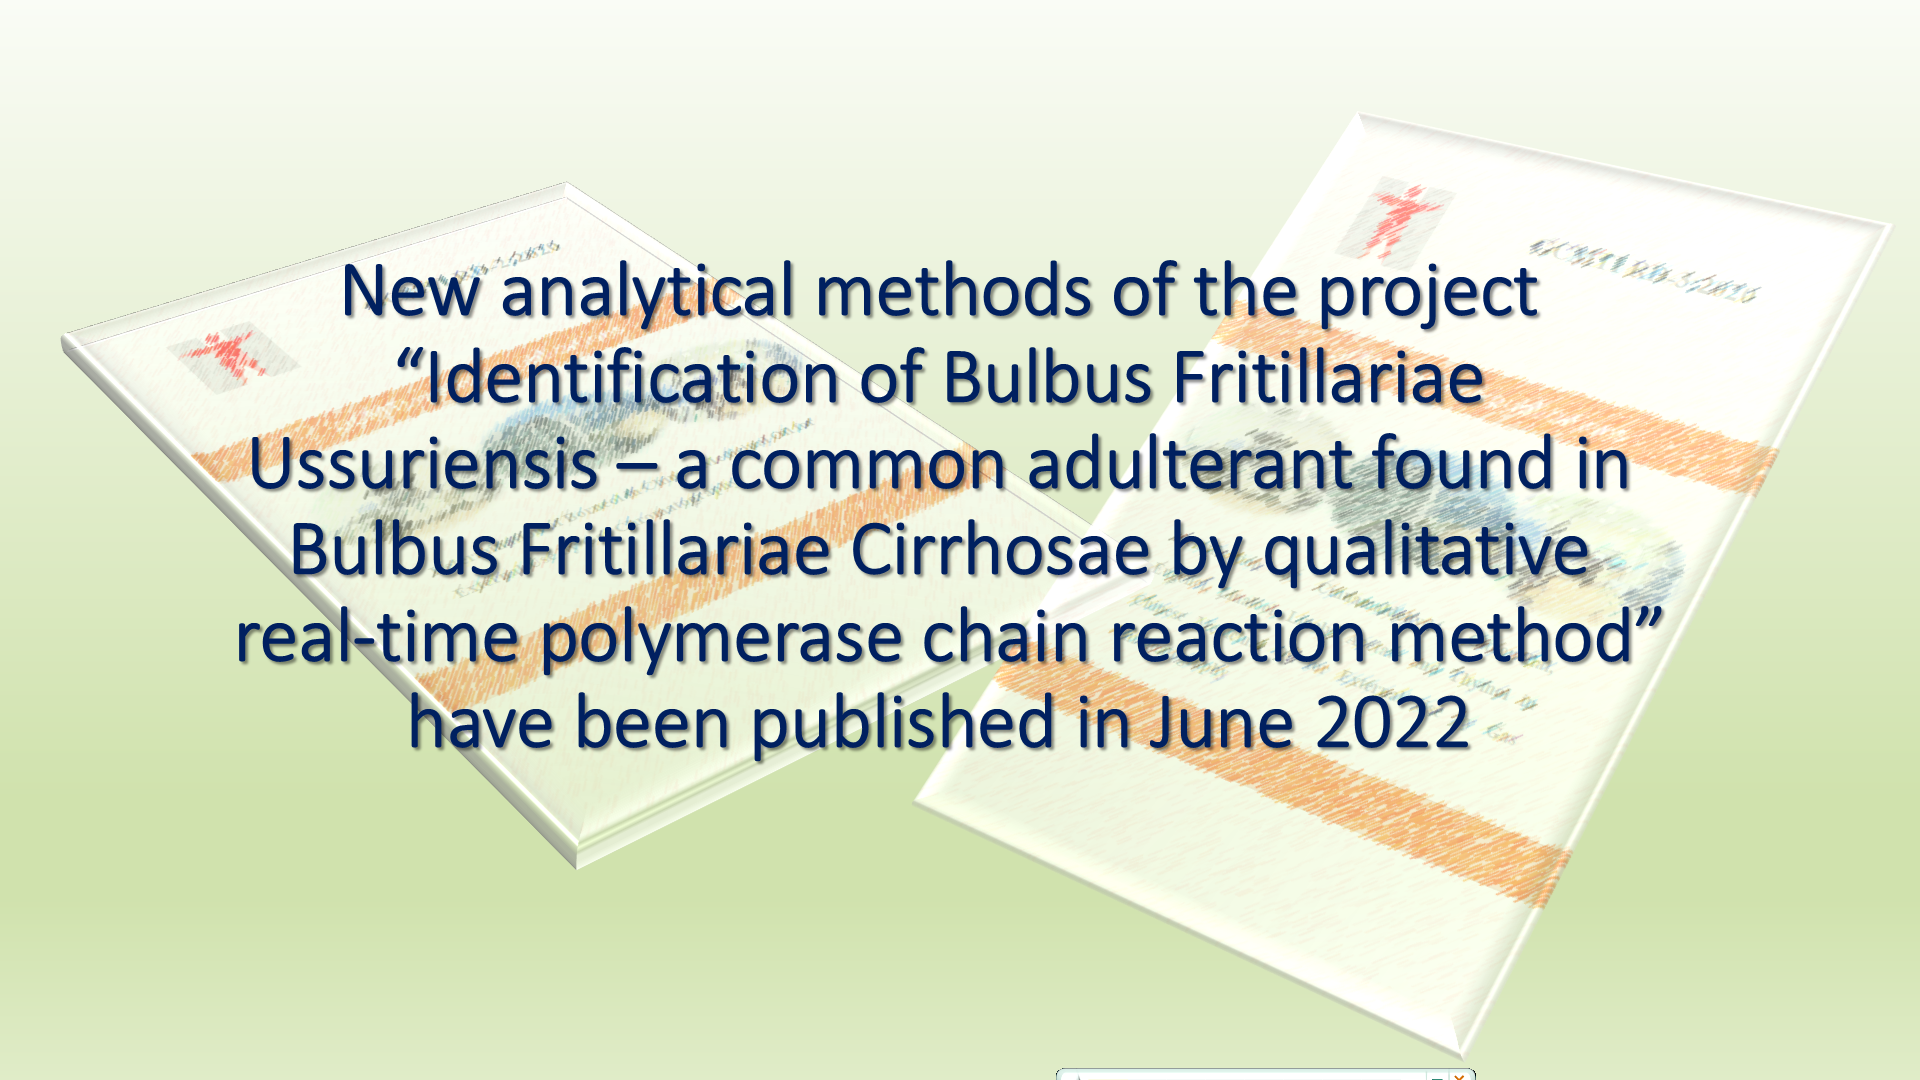 Notice for pointing: New analytical methods of the project “Identification of Bulbus Fritillariae Ussuriensis – a common adulterant found in Bulbus Fritillariae Cirrhosae by qualitative real-time polymerase chain reaction method” have been published in June 2022